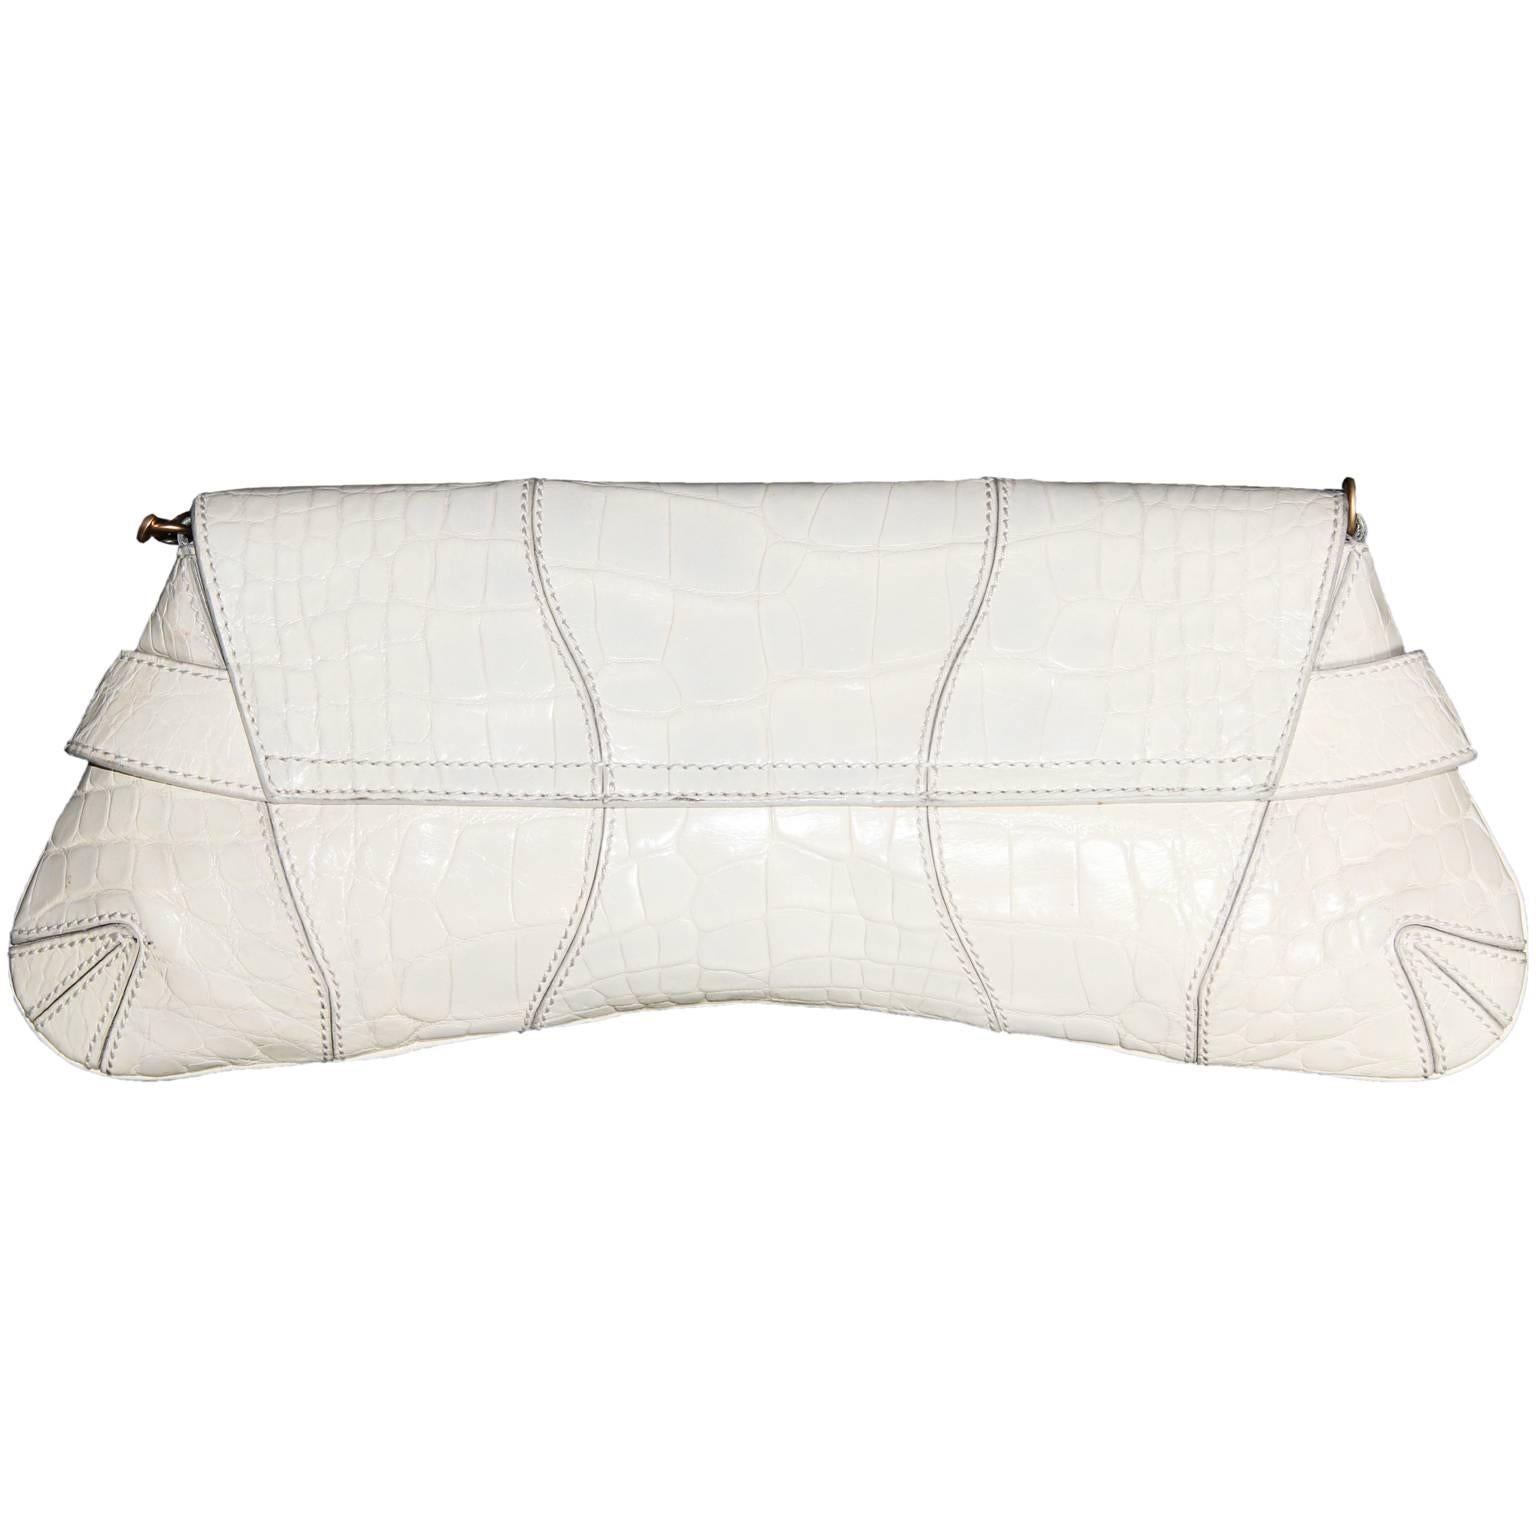 That Ridiculously Chic Tom Ford Gucci FW 2003 White Croc Leather Horsebit Bag! In Excellent Condition For Sale In Melbourne, AU